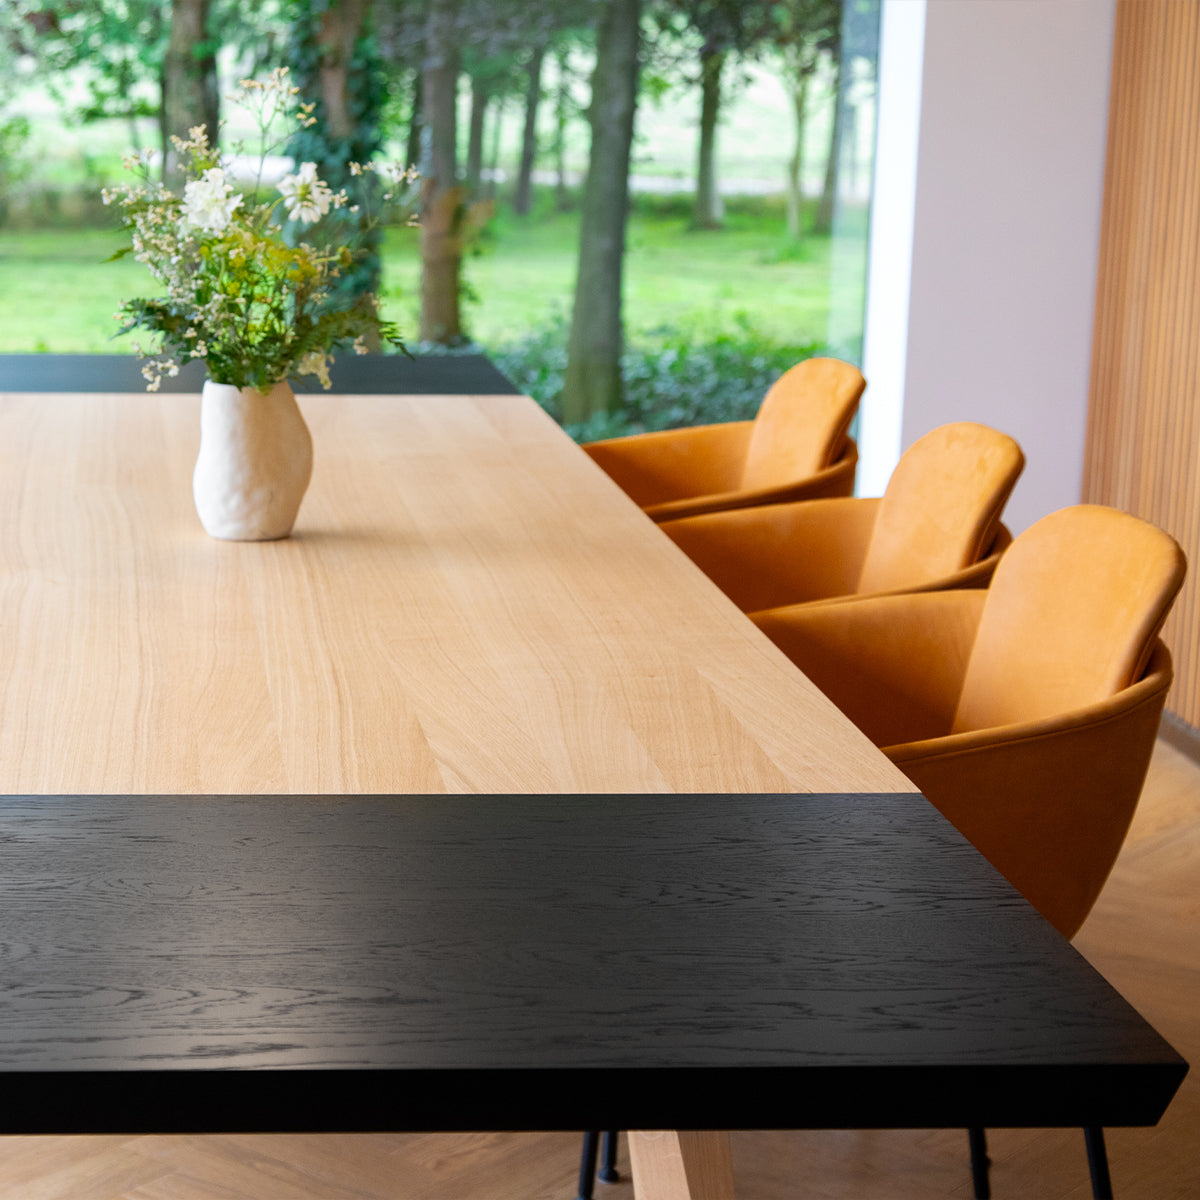 Edge Dining Table - Extension Leaf [Contract]